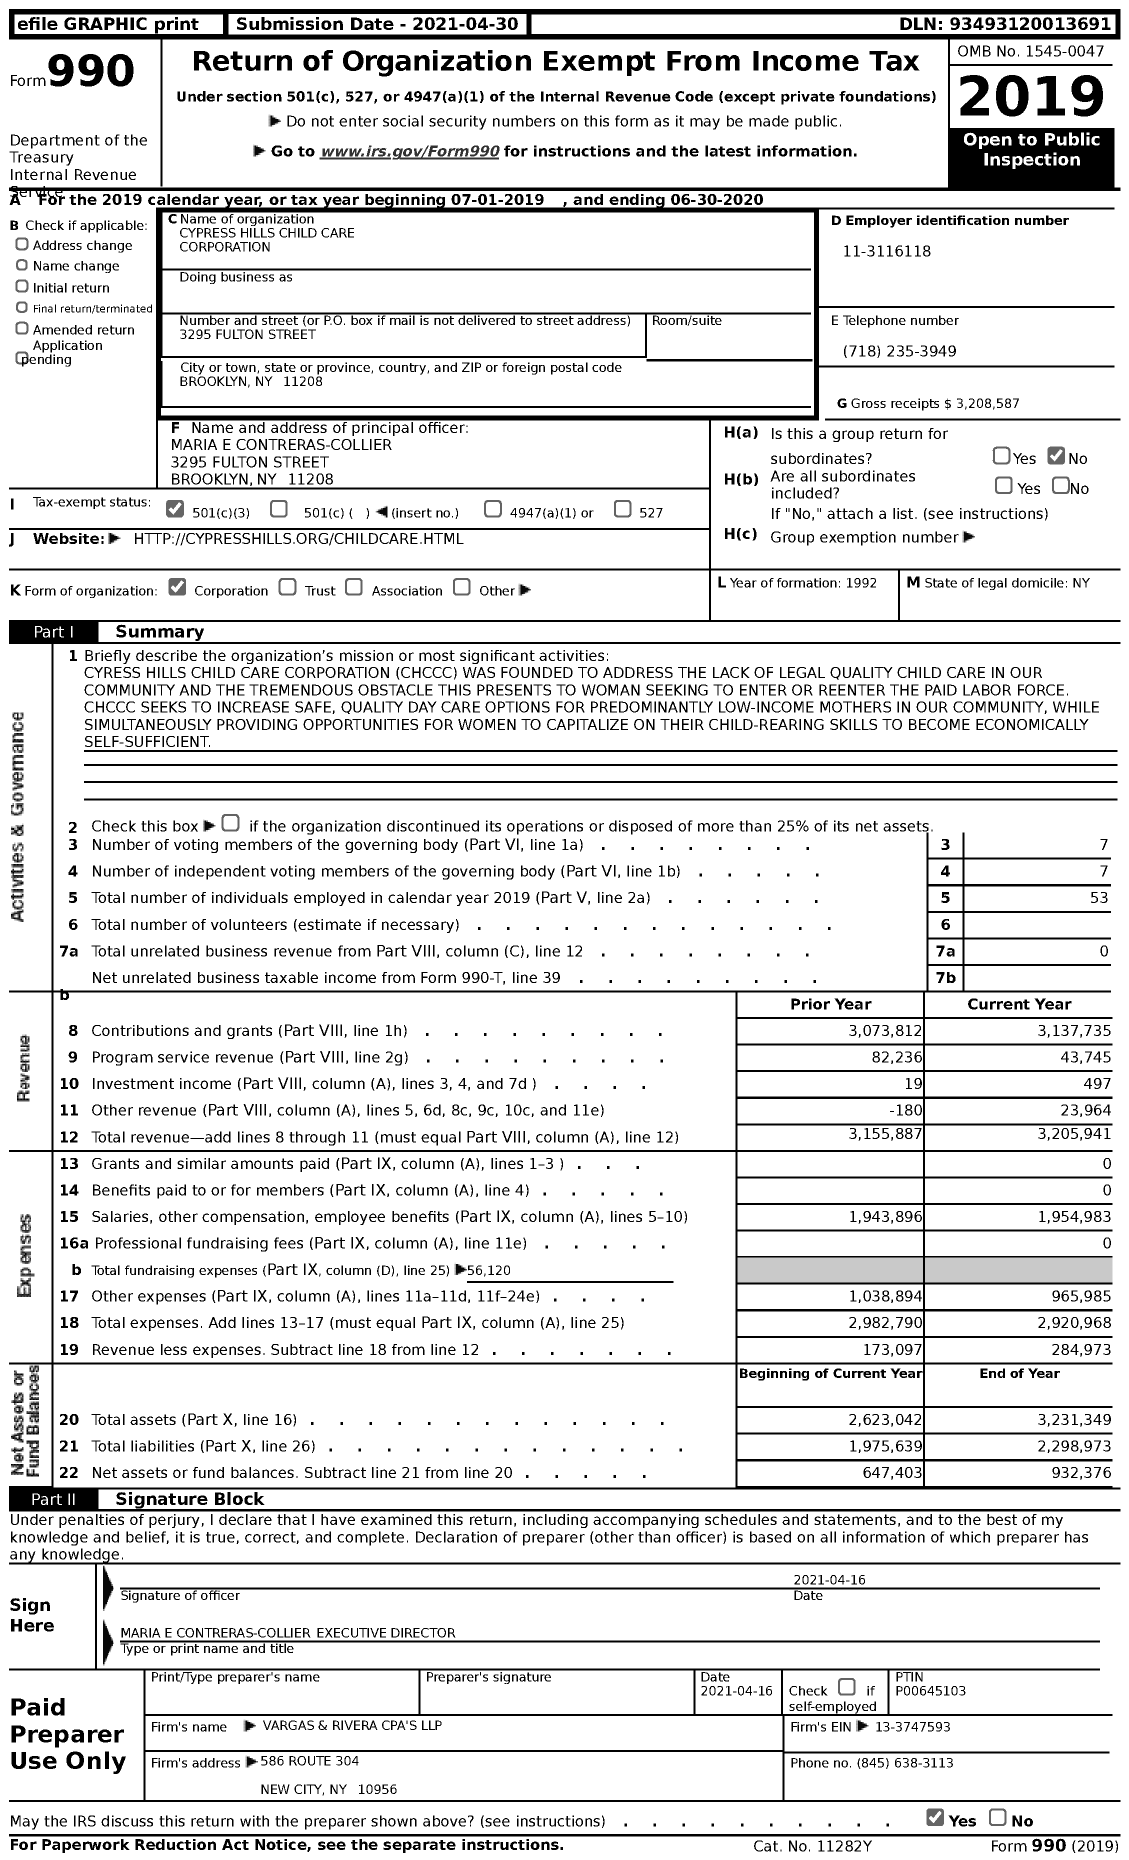 Image of first page of 2019 Form 990 for Cypress Hills Child Care Corporation